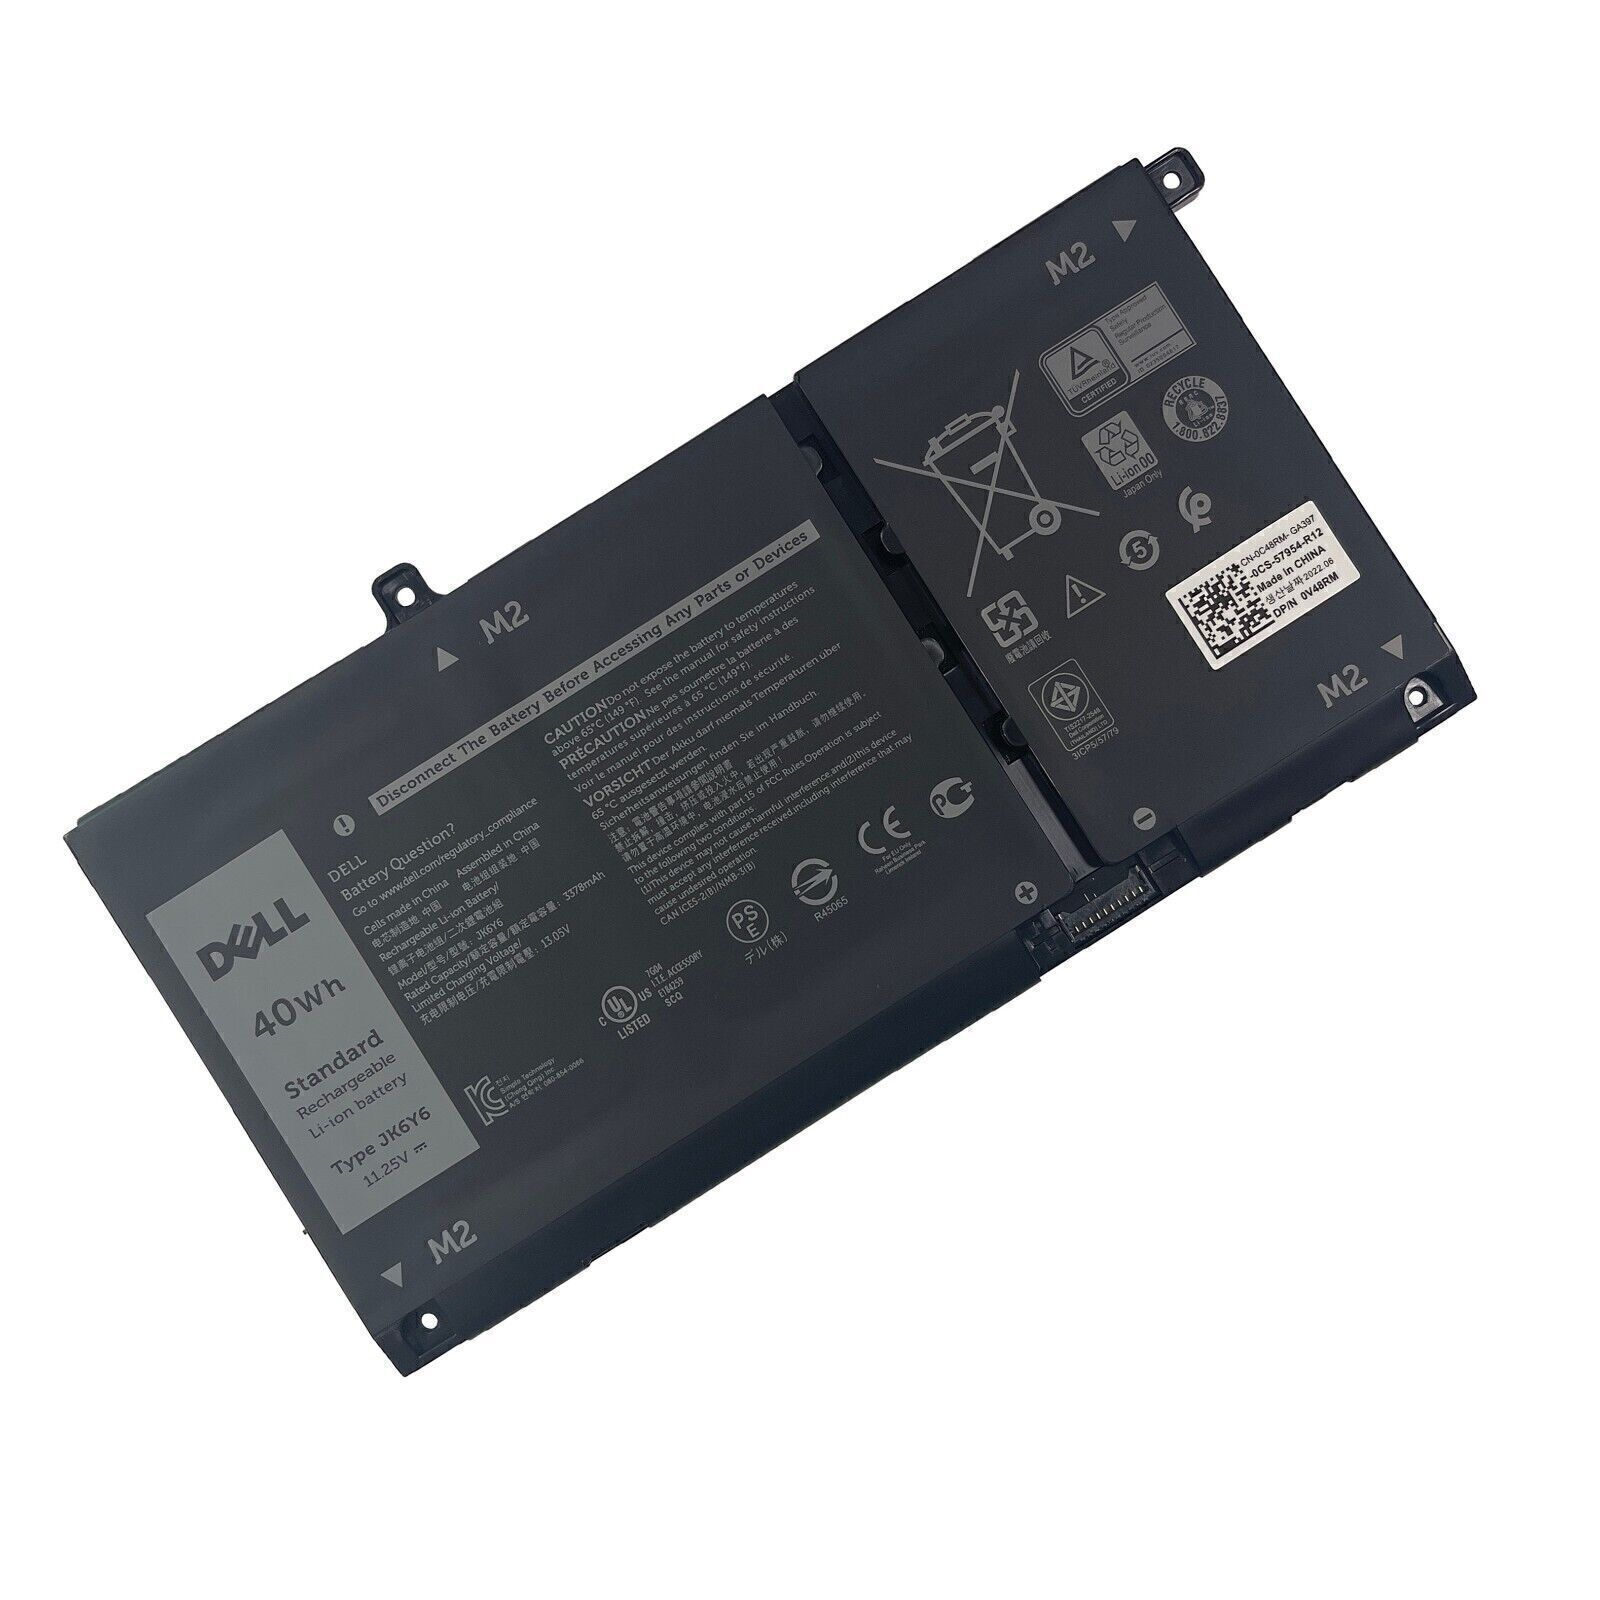 NEW Genuine 40Wh JK6Y6 Battery For Dell Inspiron 5301 5401 5402 5408 5501 2-in-1